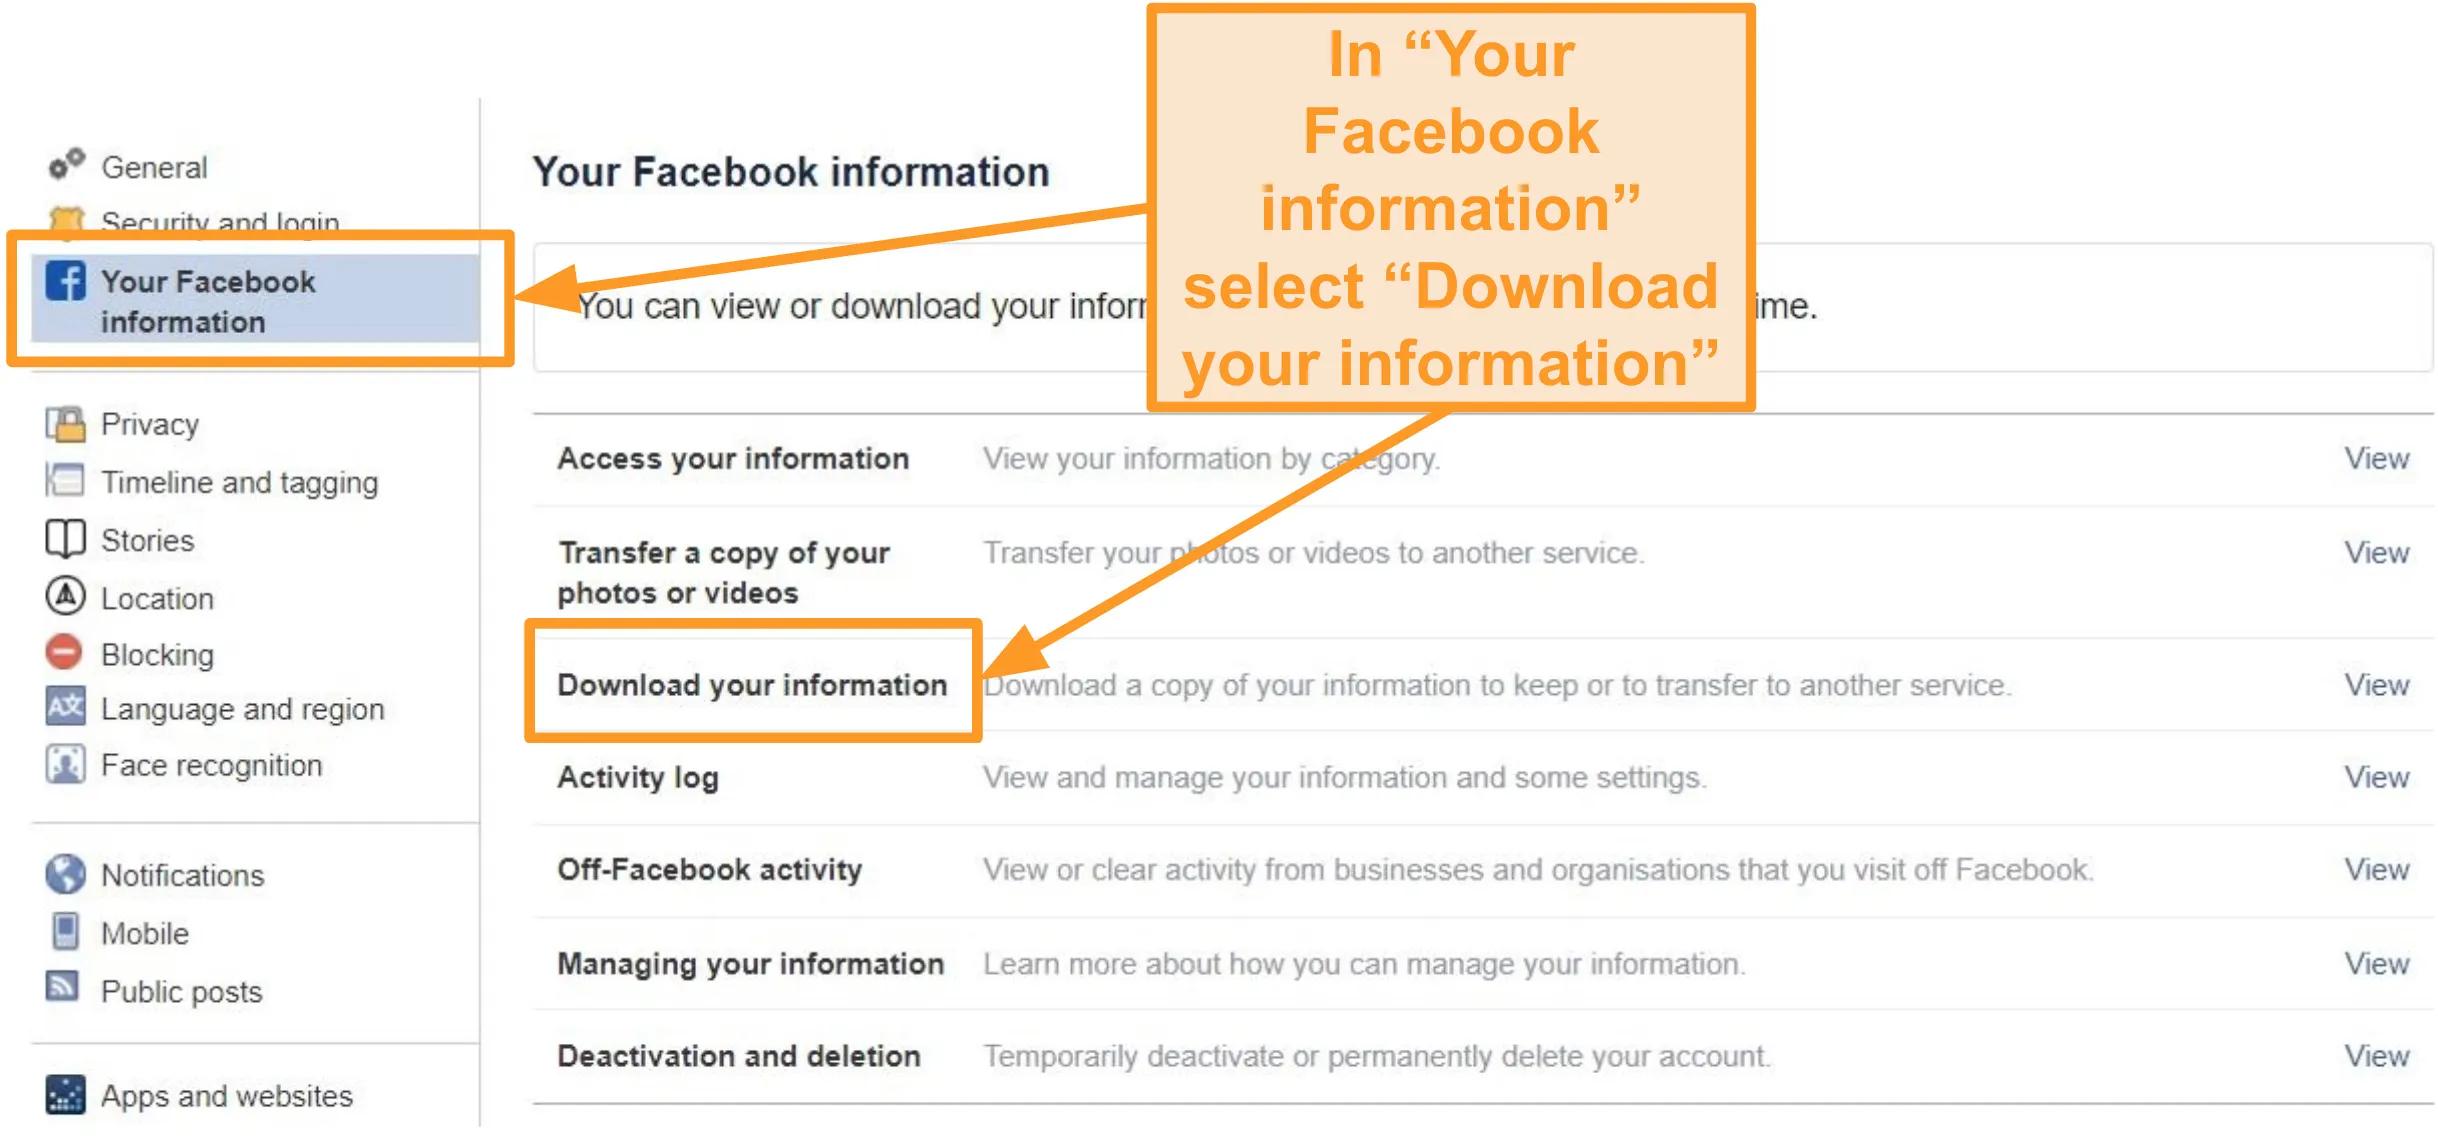 Screenshot of "Your Facebook information" tab highlighting how to download your information